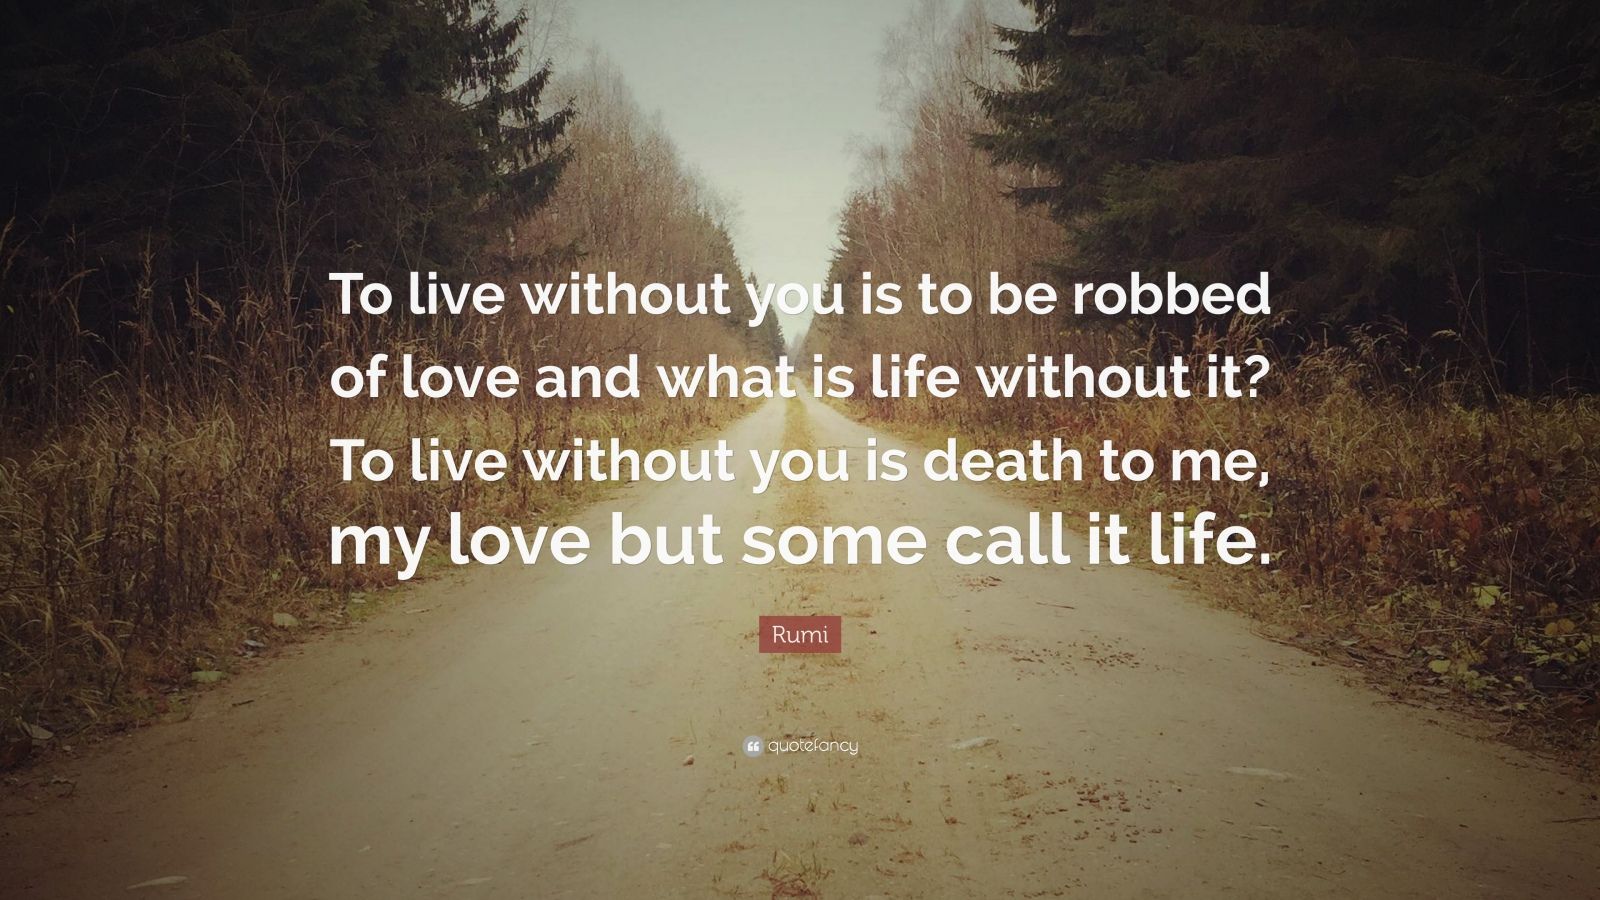 Rumi Quote: “To live without you is to be robbed of love and what is